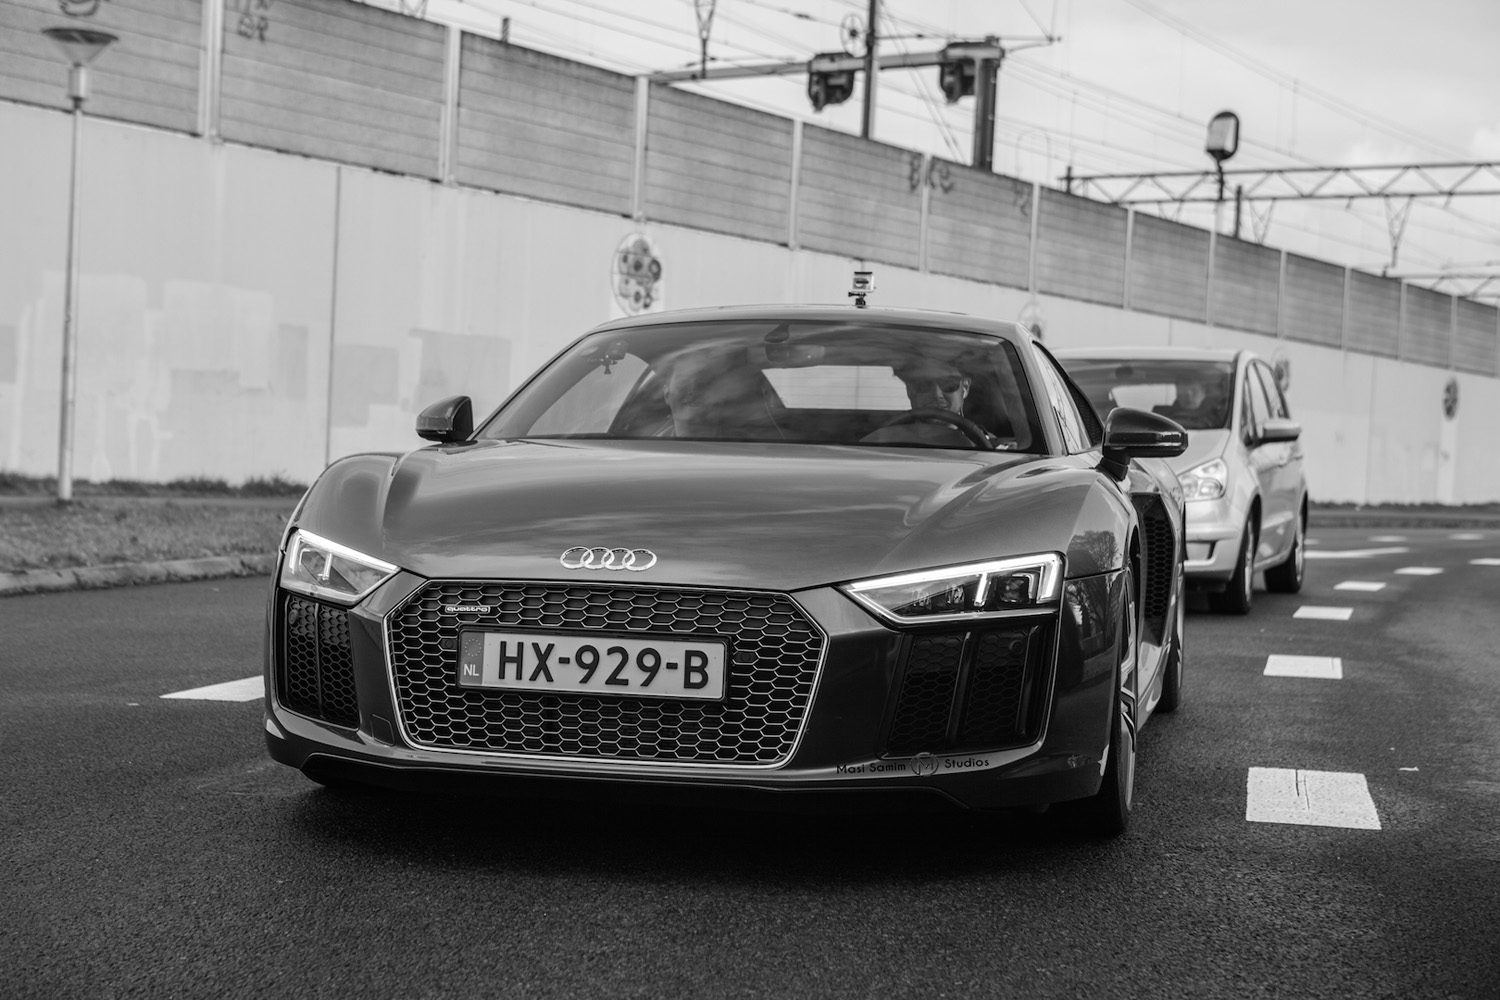 Event: RS3-TTRS Club meeting in Eindhoven